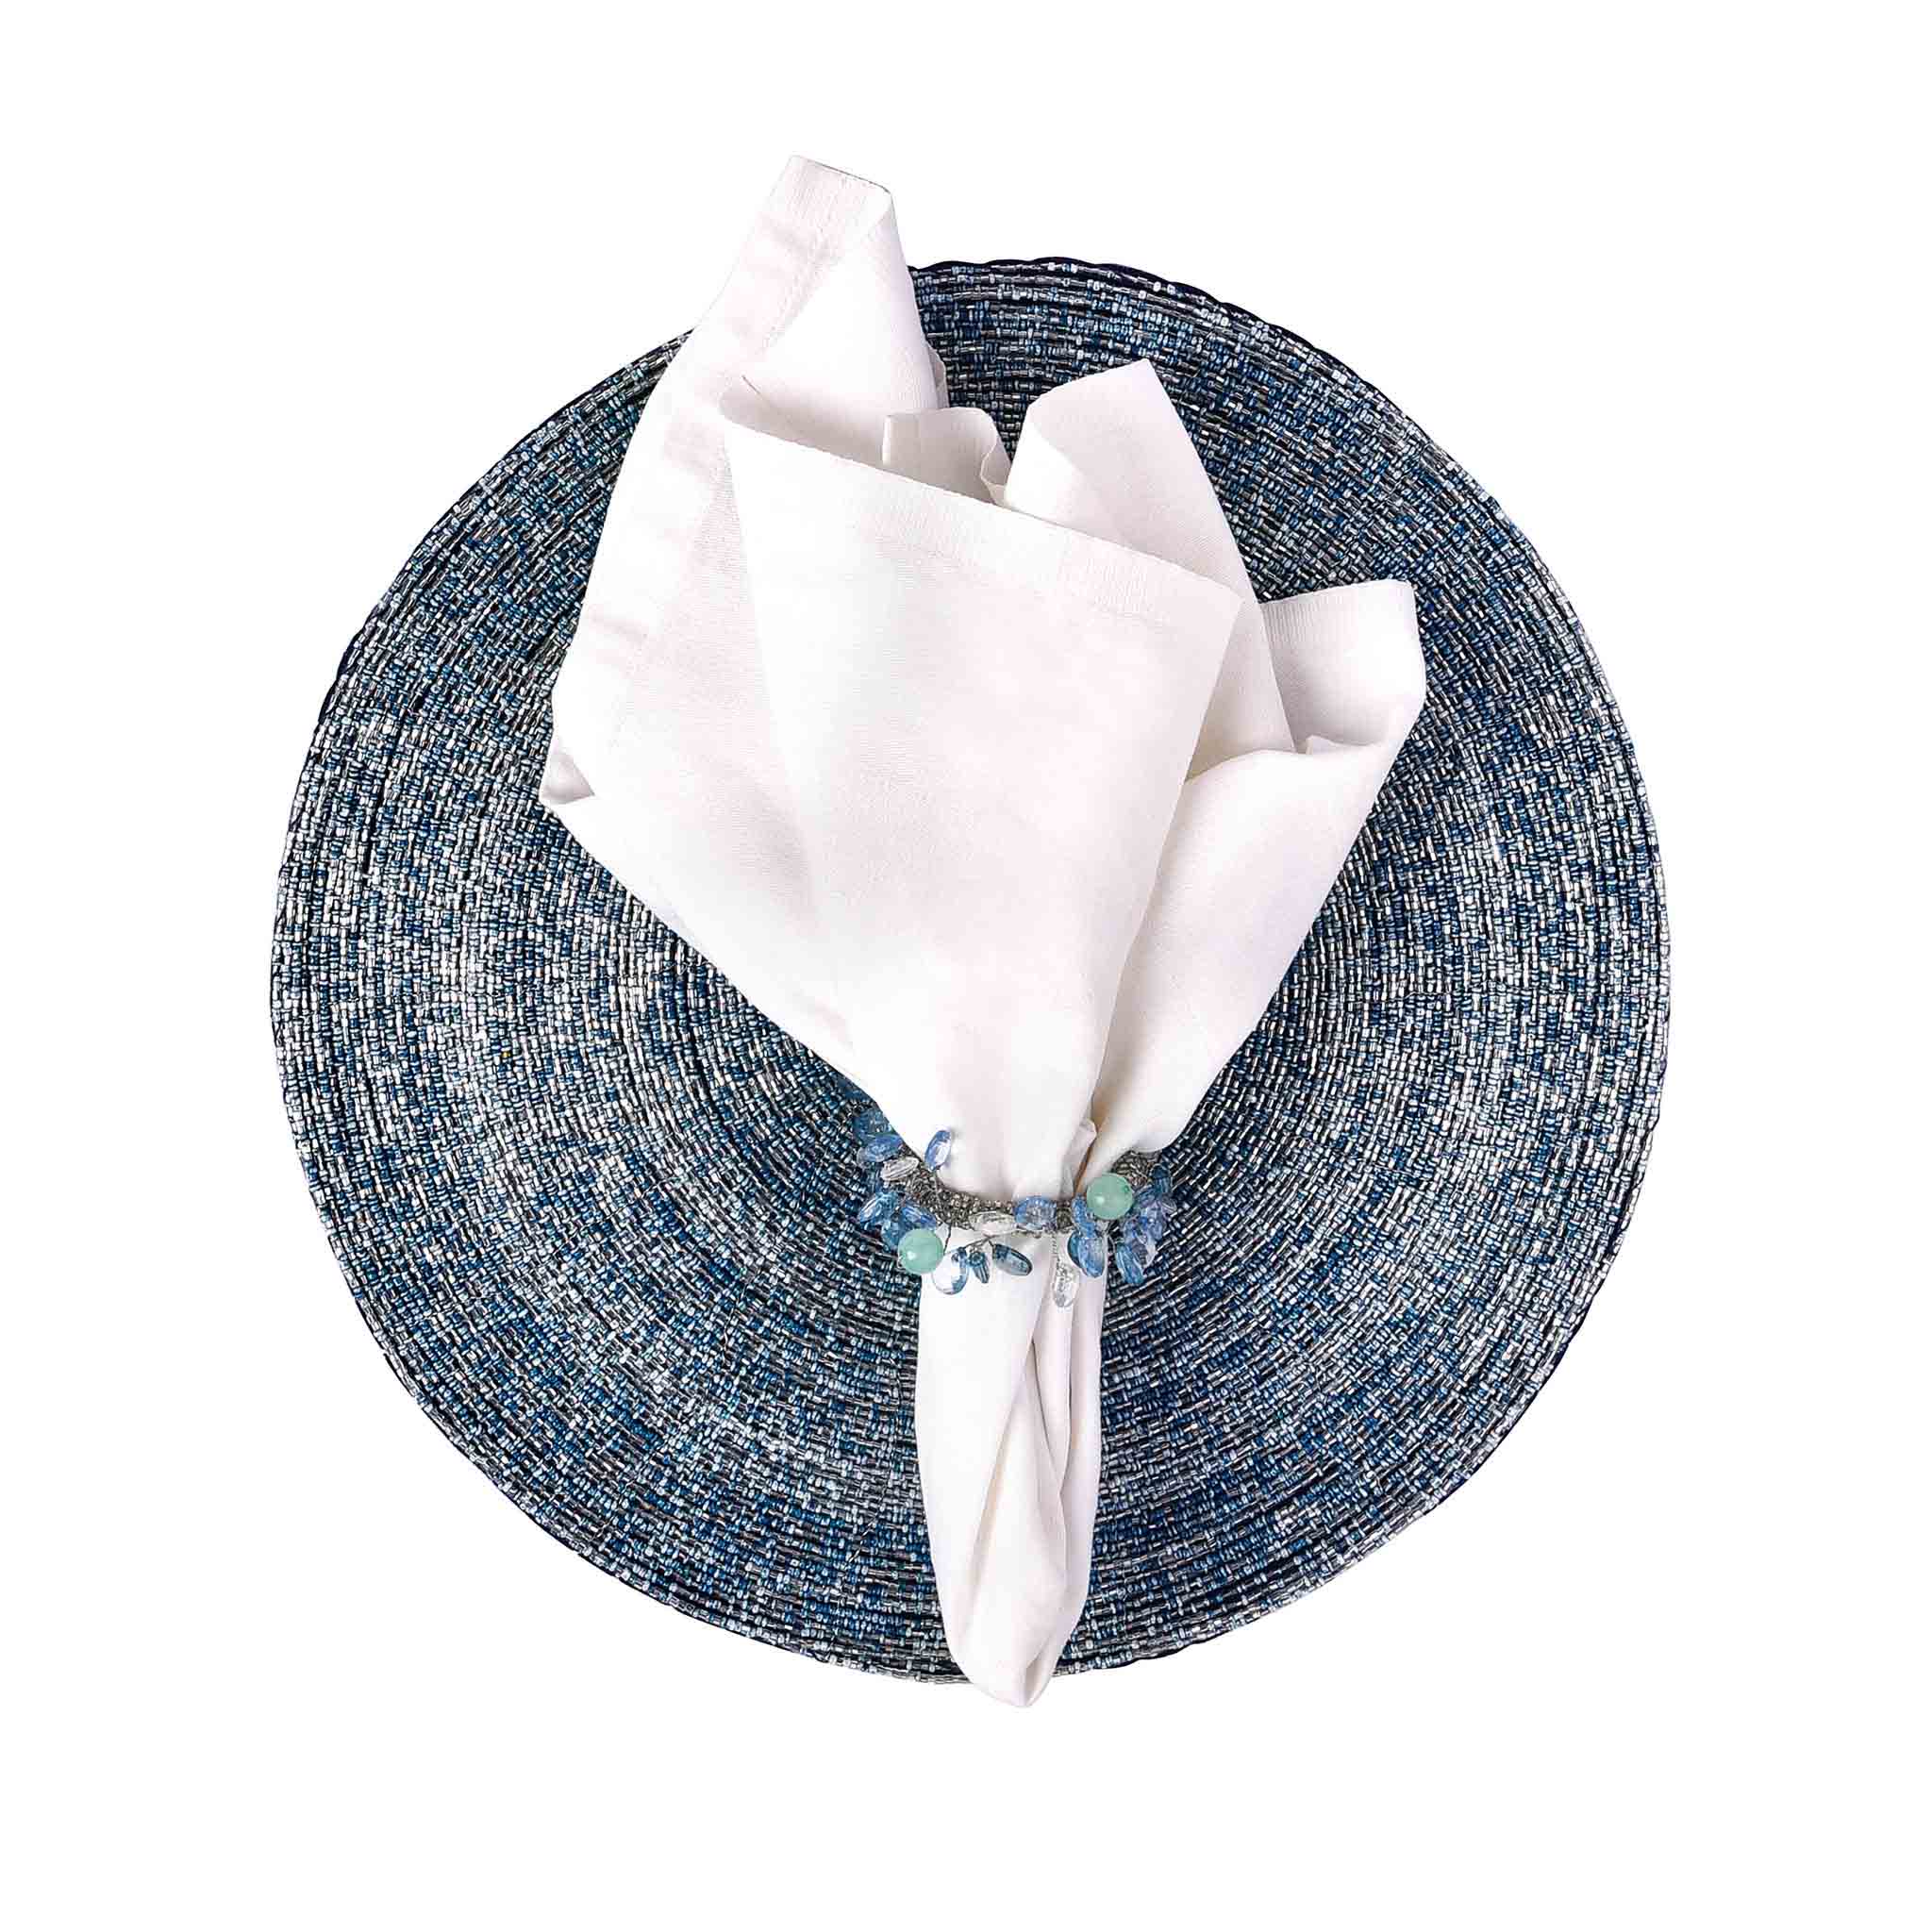 Glass Beaded Placemat<br>Size: 13.5" Round<br>Set of 4<br>Color: Dark Blue Mix